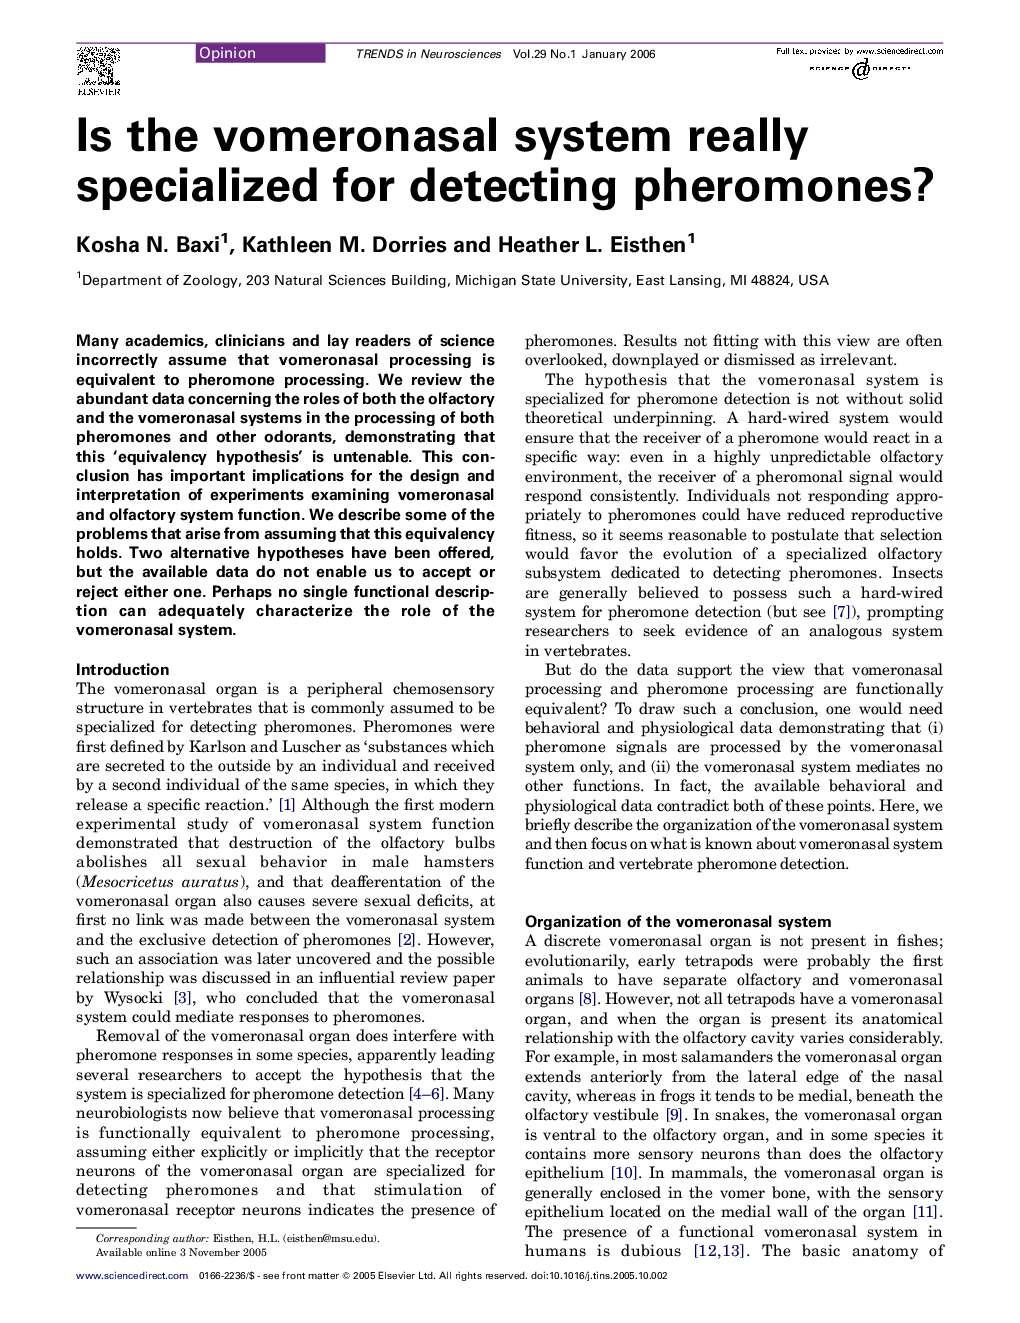 Is the vomeronasal system really specialized for detecting pheromones?